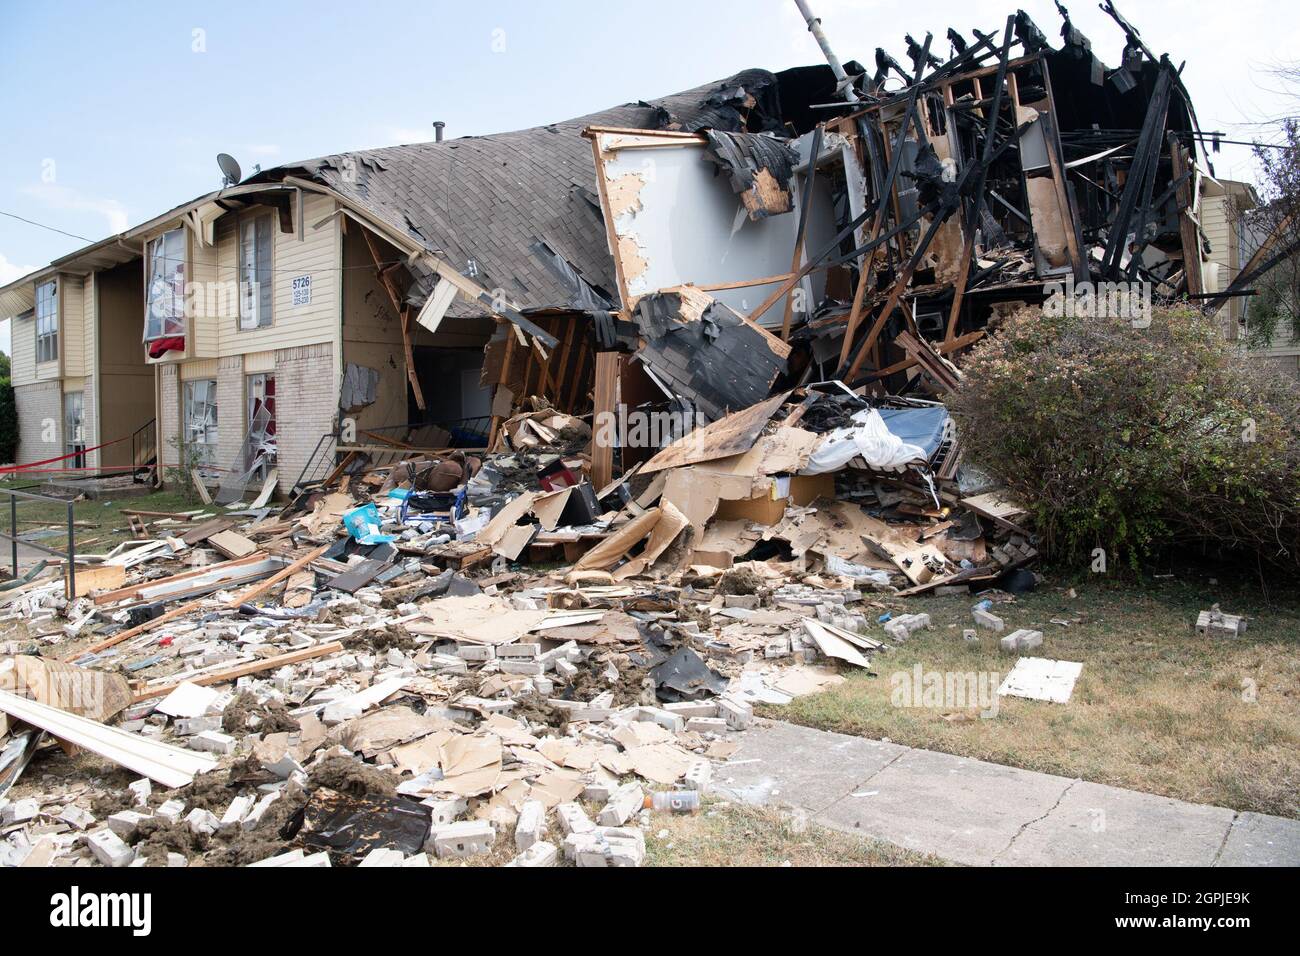 Dallas, Texas, USA. 29th Sep, 2021. An apartment complex in southern Dallas TX partially collapsed after an explosion ''“ apparently caused by a natural gas leak ''“ occurred while Dallas Fire/Rescue were investigating reports of a natural gas leak. Four firefighters and four civilians were injured in the blast. Three of the firefighters are listed in critical condition in Dallas' Parkland Hospital. All residents have been accounted for, and the American Red Cross is providing relocation services.One resident spoke to a media scrum and said he smelled gas during the previous evening, star Stock Photo